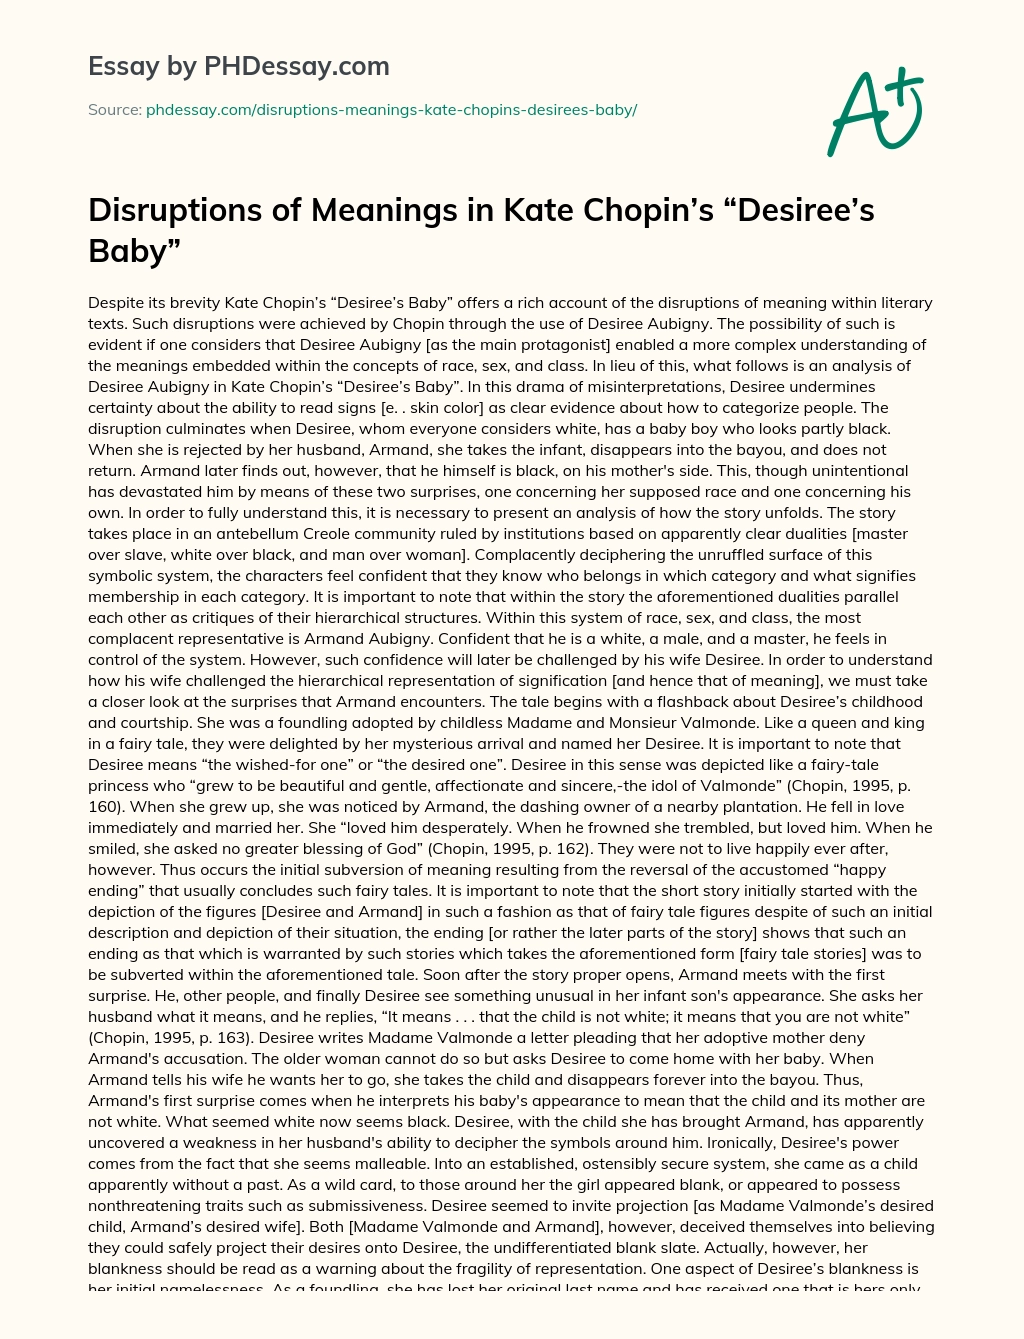 Disruptions of Meanings in Kate Chopin’s “Desiree’s Baby” essay